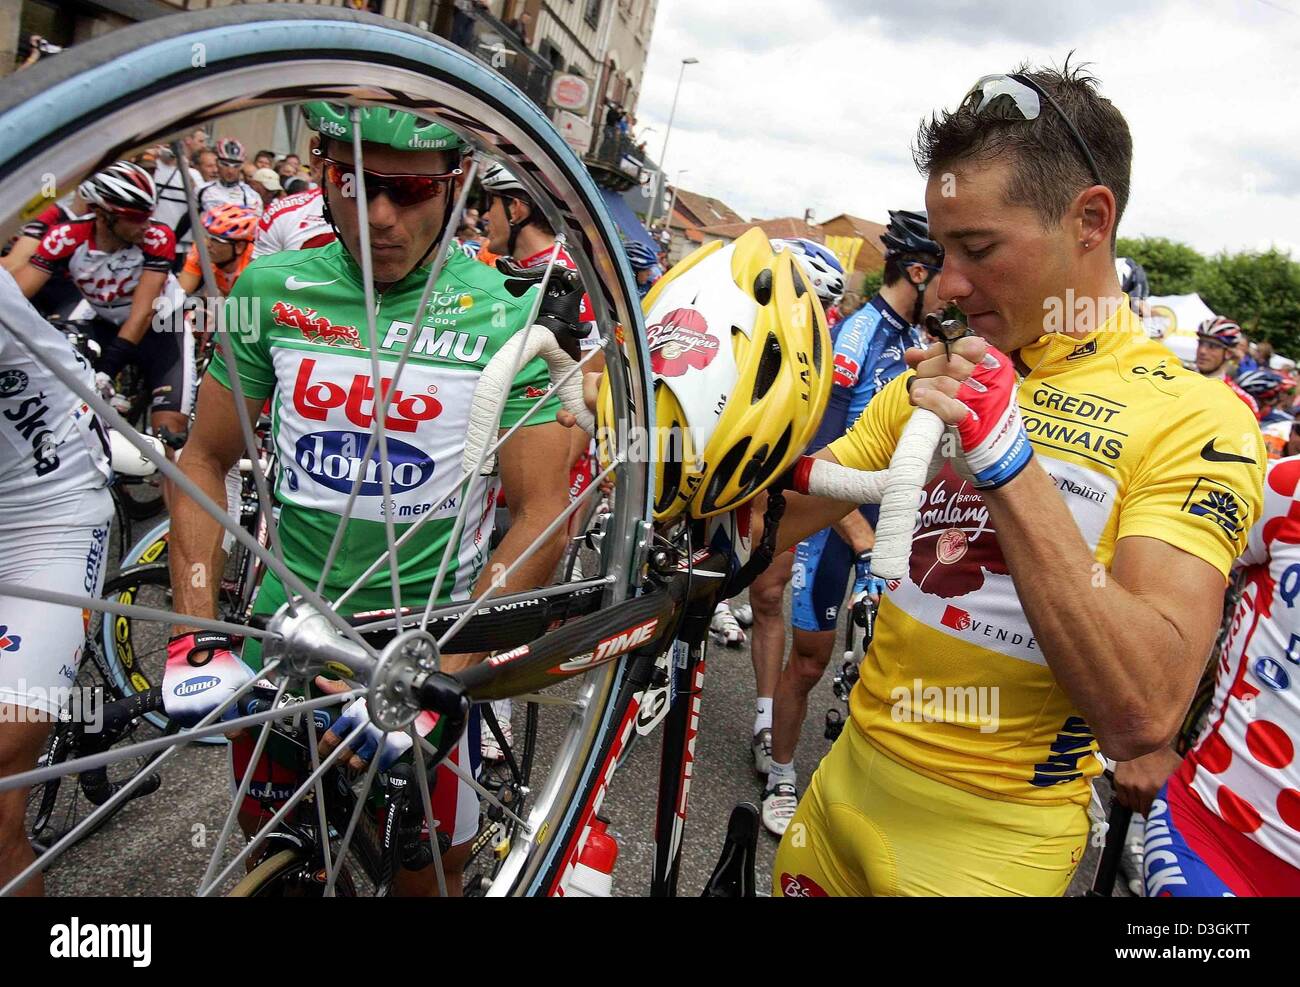 (dpa) - Australian cyclist Robbie McEwen (L) of team Lotto-Domo, wearing the green jersey of the best sprinter, and French cyclist Thomas Voeckler of team Brioches La Boulangere, wearing the yellow jersey of the best overall leader, await the start of the 9th stage of the Tour de France cycling race in Saint-Leonard-de-Noblat, France, 13 July 2004. The 160.5 km long stage from Sain Stock Photo